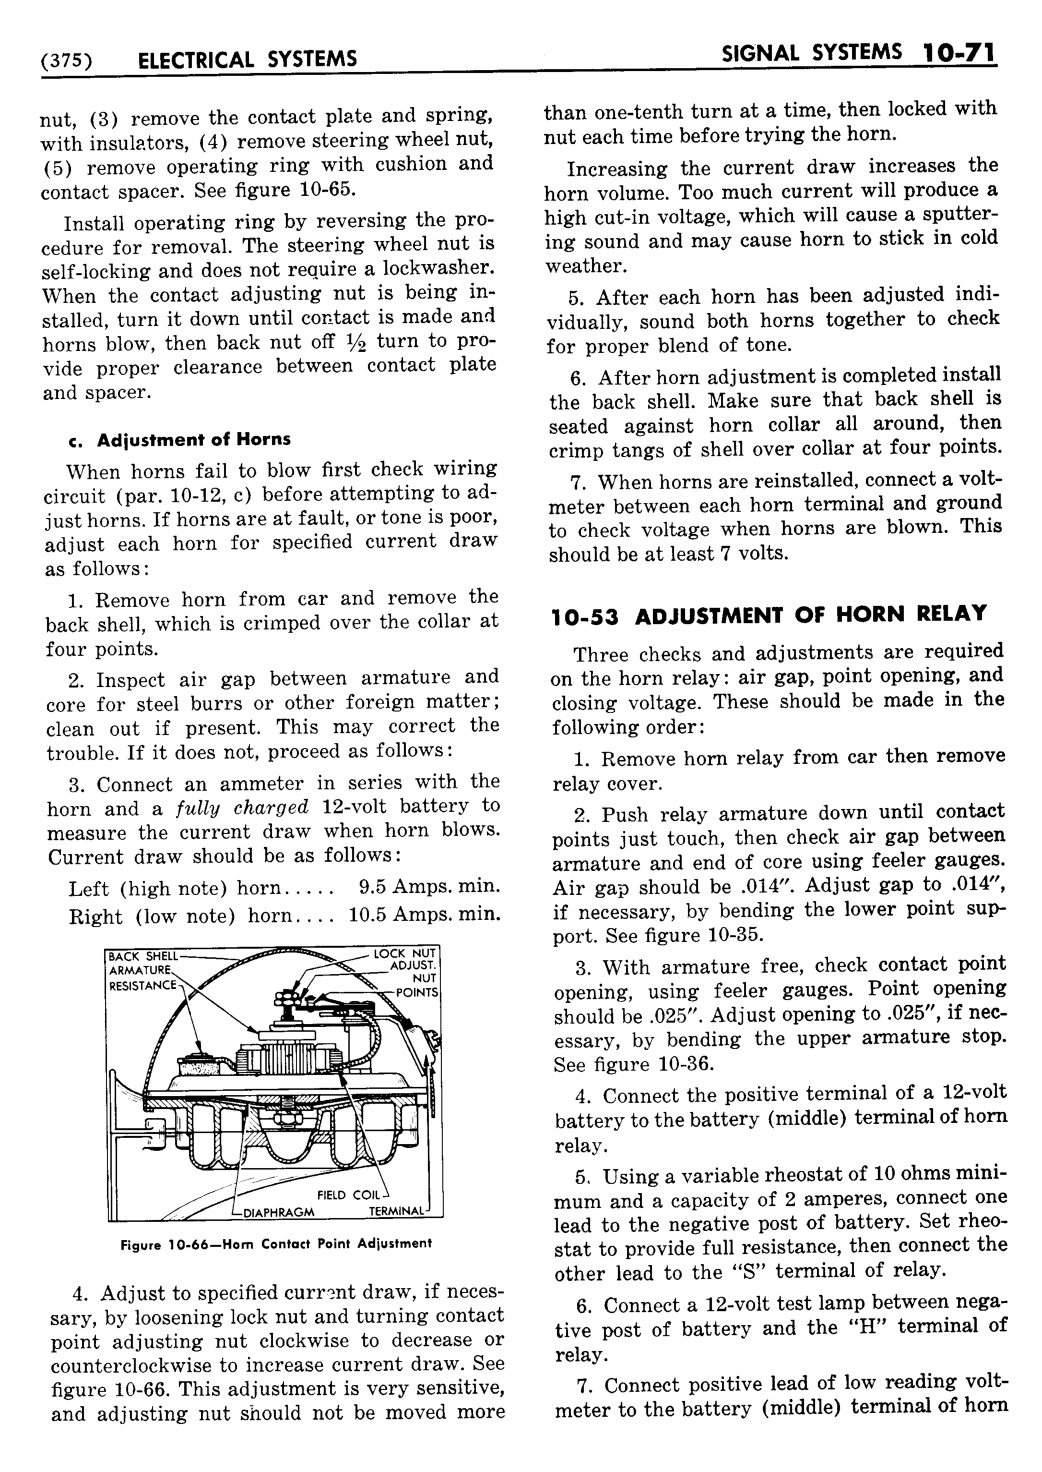 n_11 1955 Buick Shop Manual - Electrical Systems-071-071.jpg